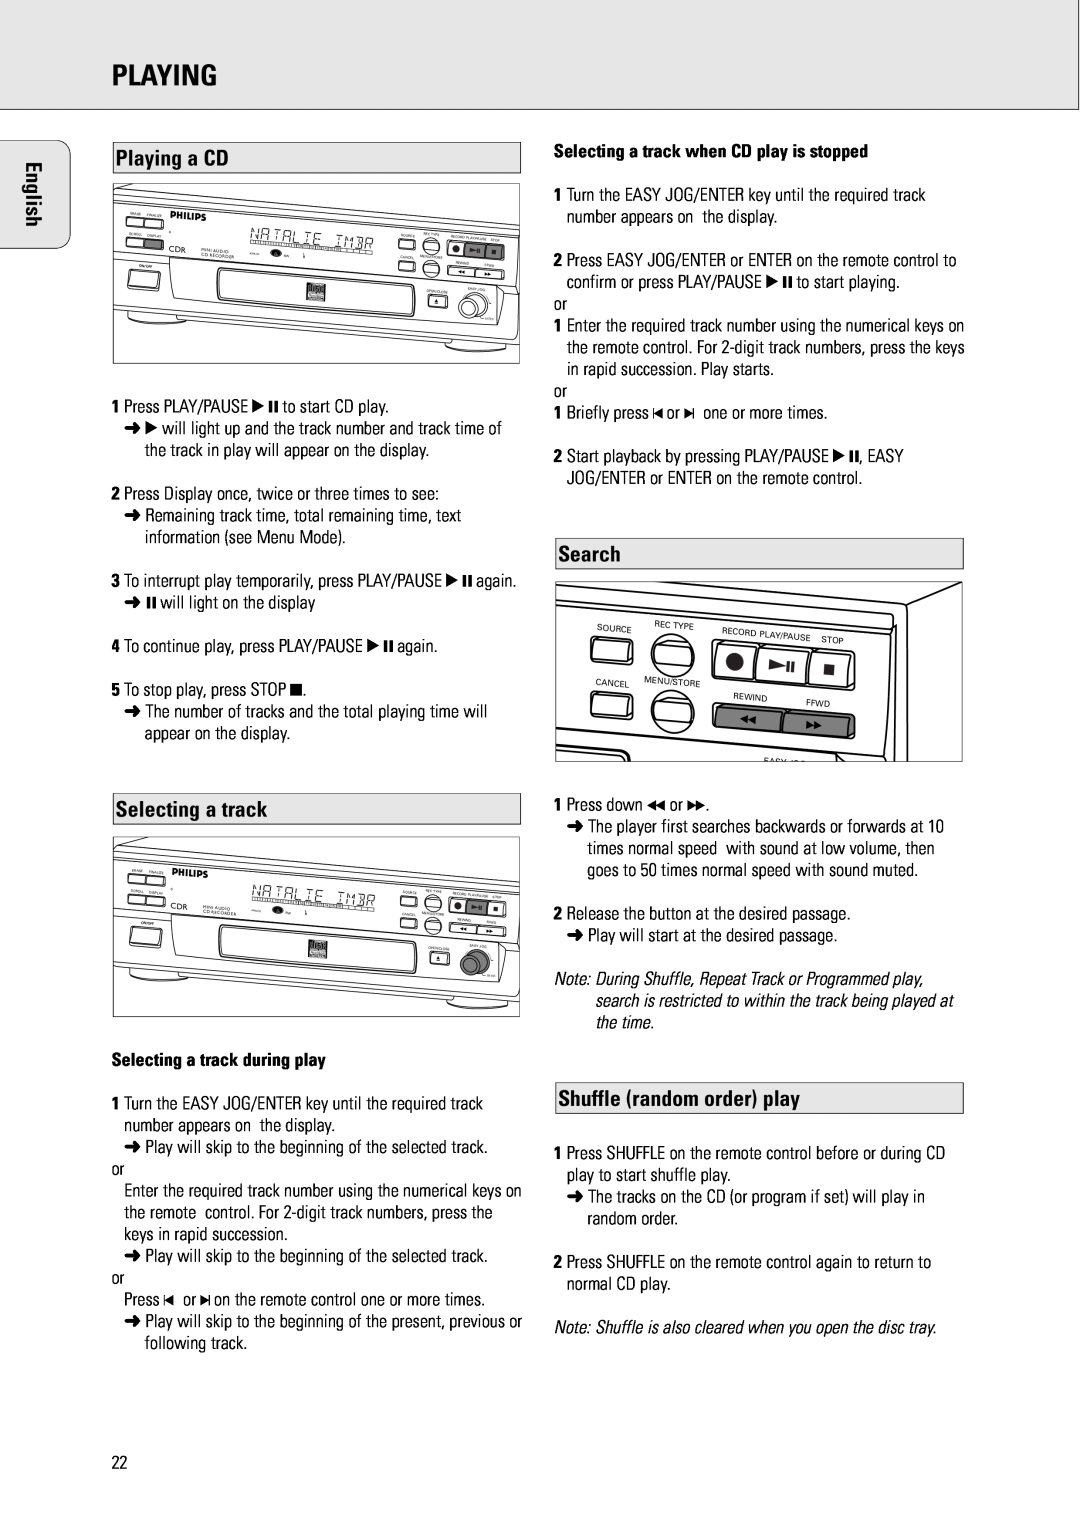 Philips CDR570 manual Playing a CD, Search, Shuffle random order play, Selecting a track during play, English 